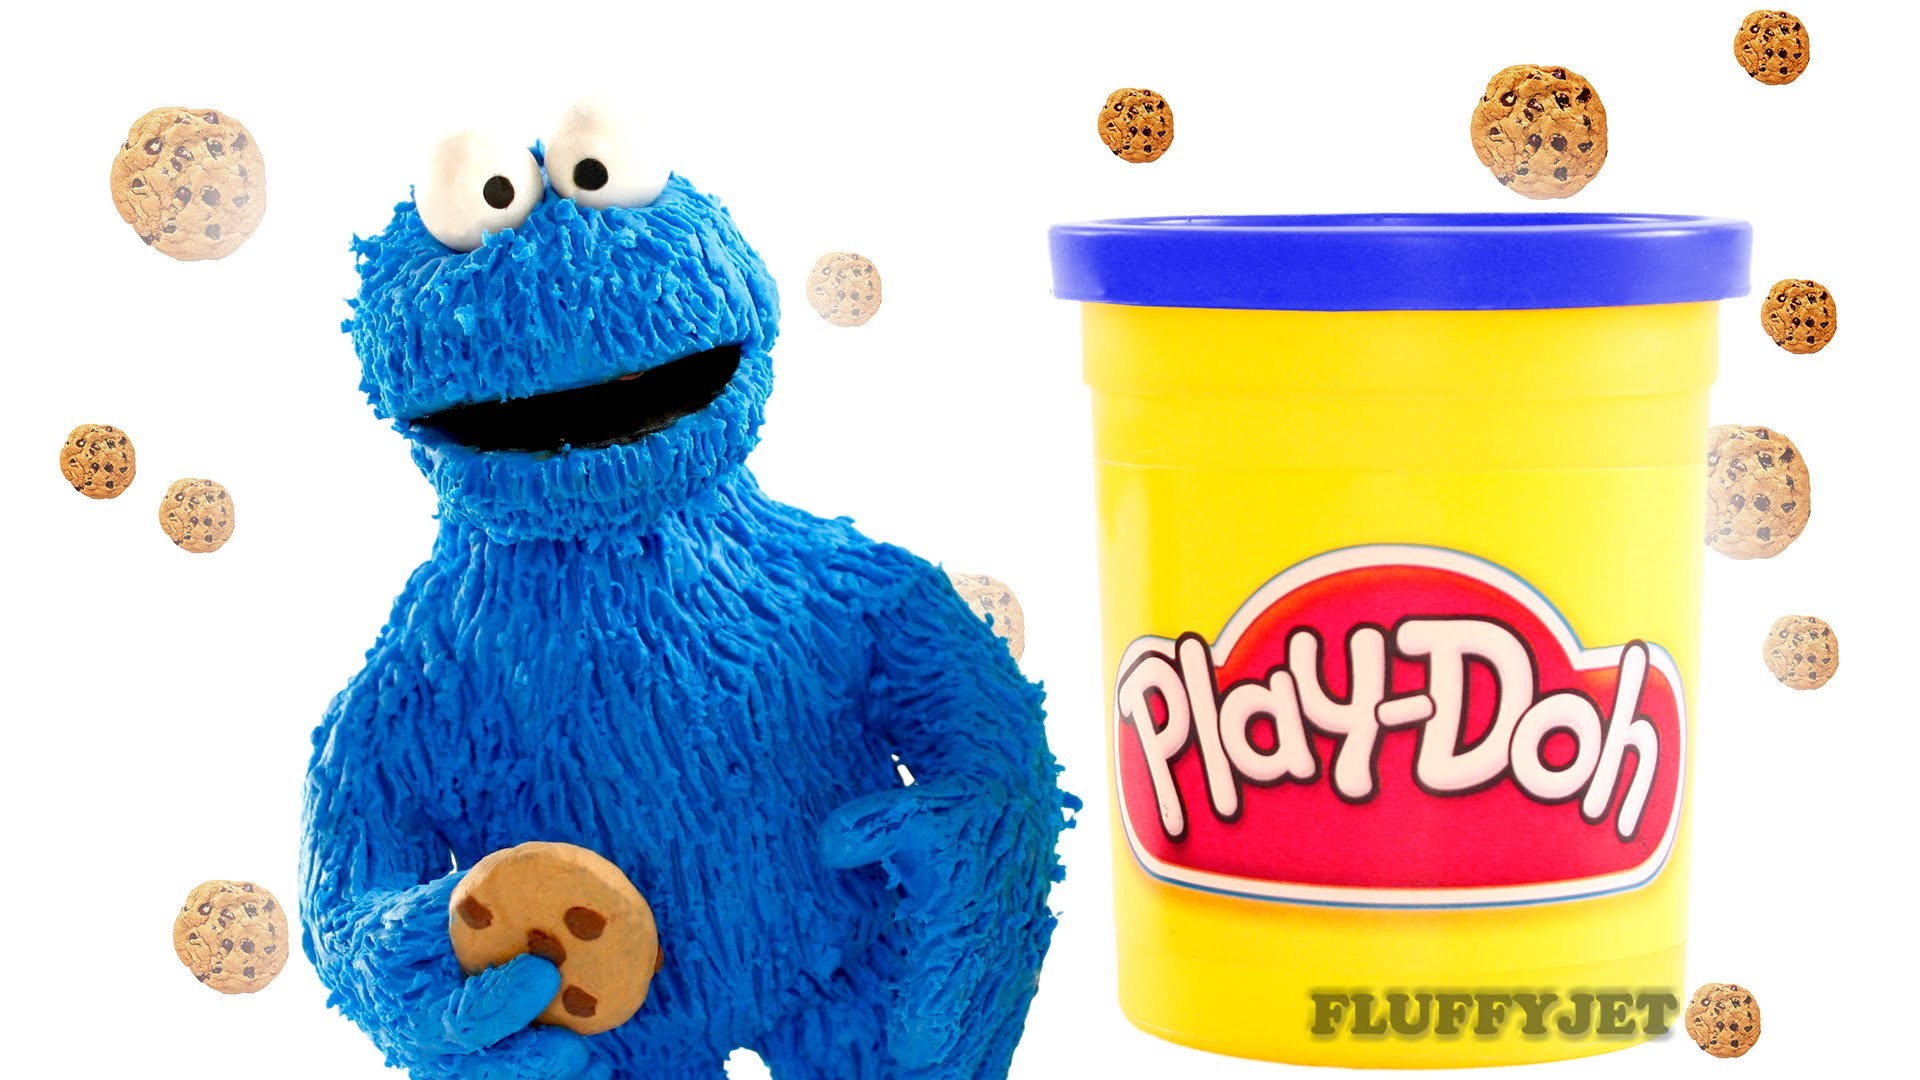 1920x1080 Pin Cookie-monster-free-wallpapers-box on Pinterest